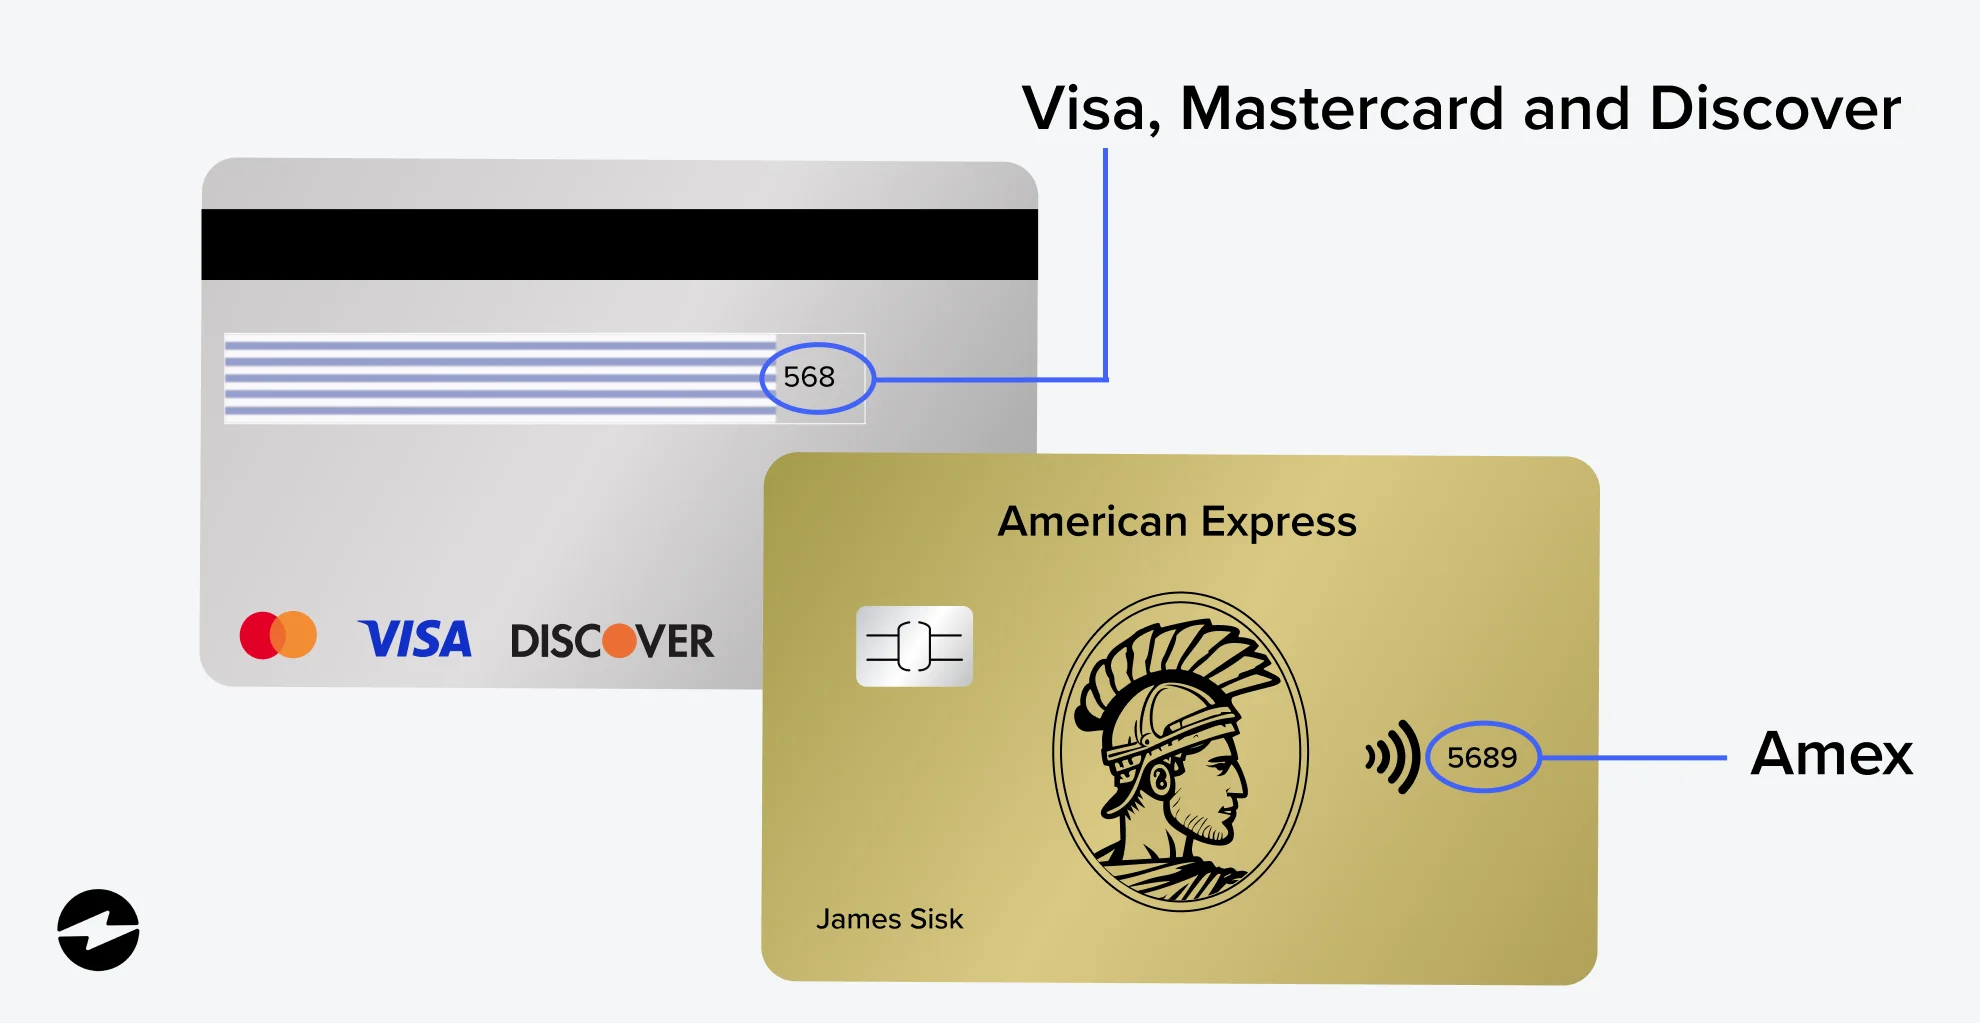 What is the Security Code on a Credit Card?